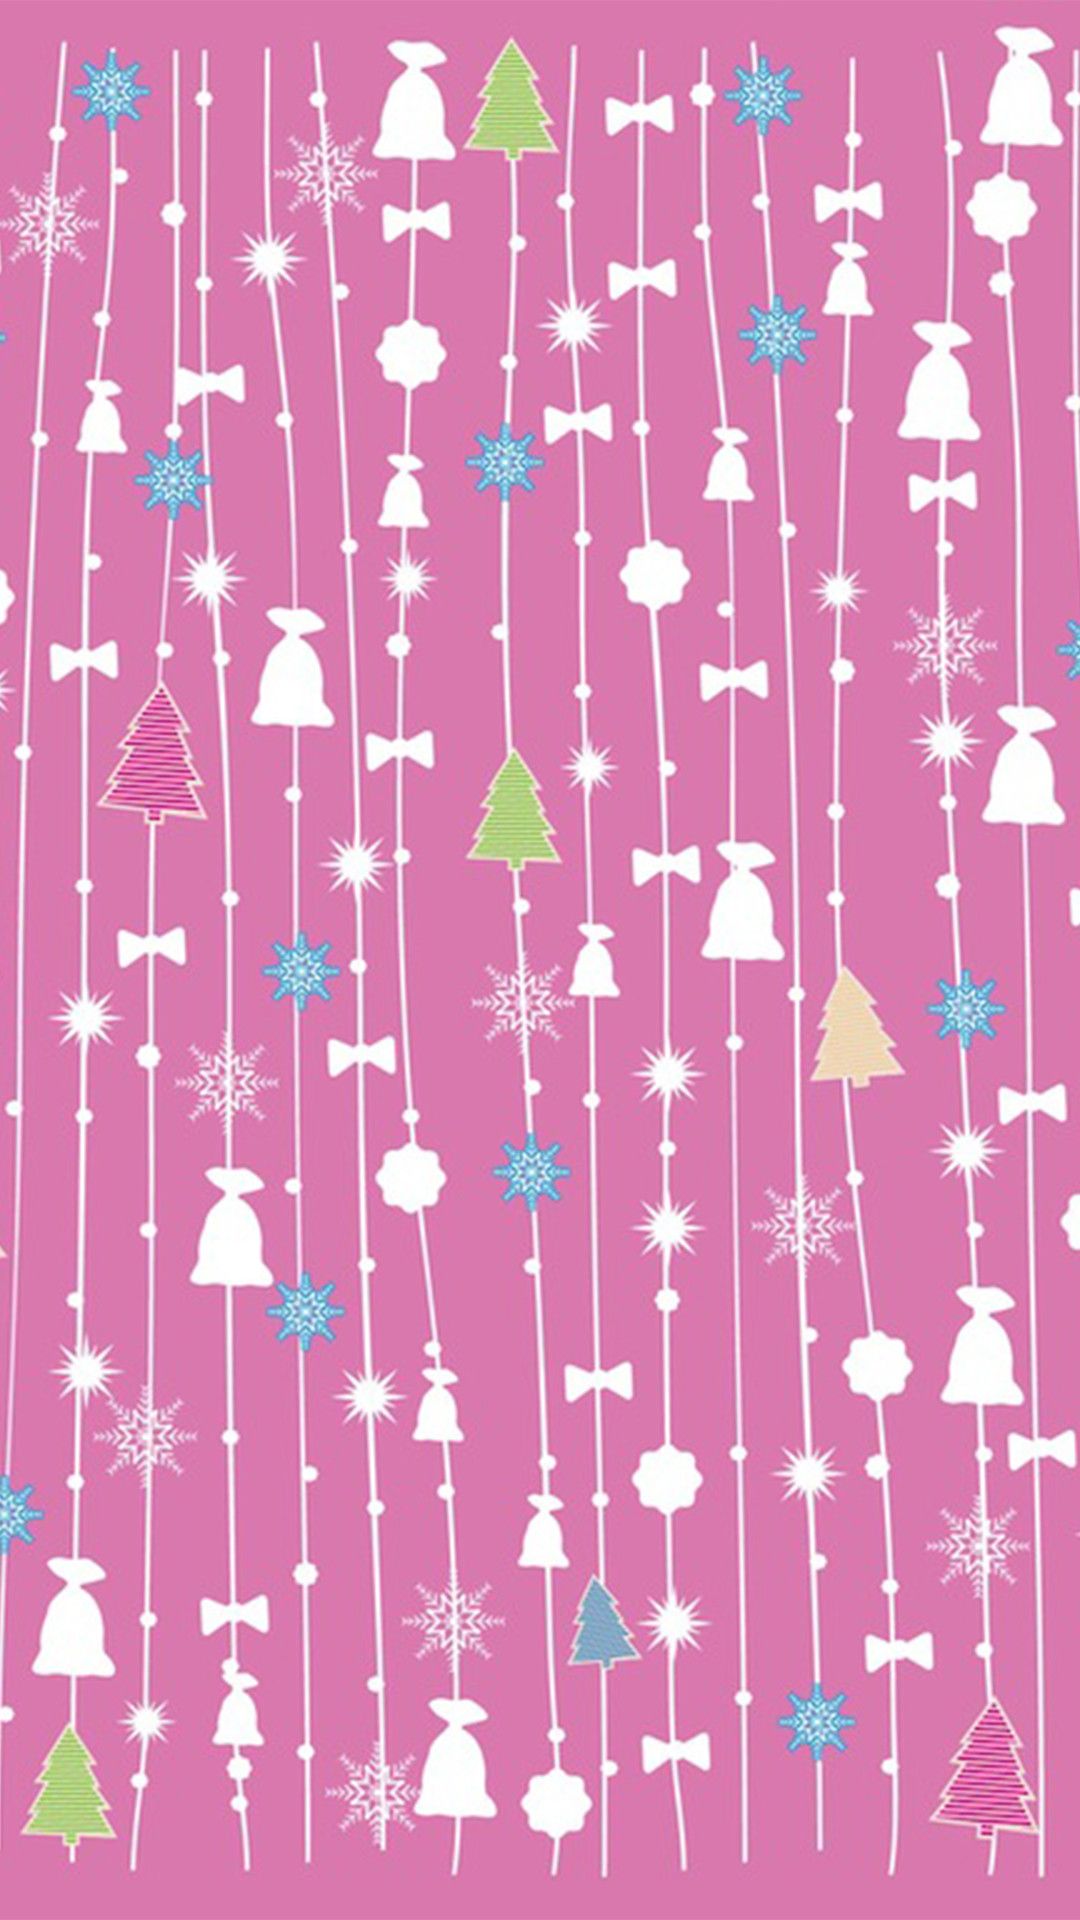 Girly iPhone 6 Cute Christmas Wallpaper. So Give Me Coffe & TV